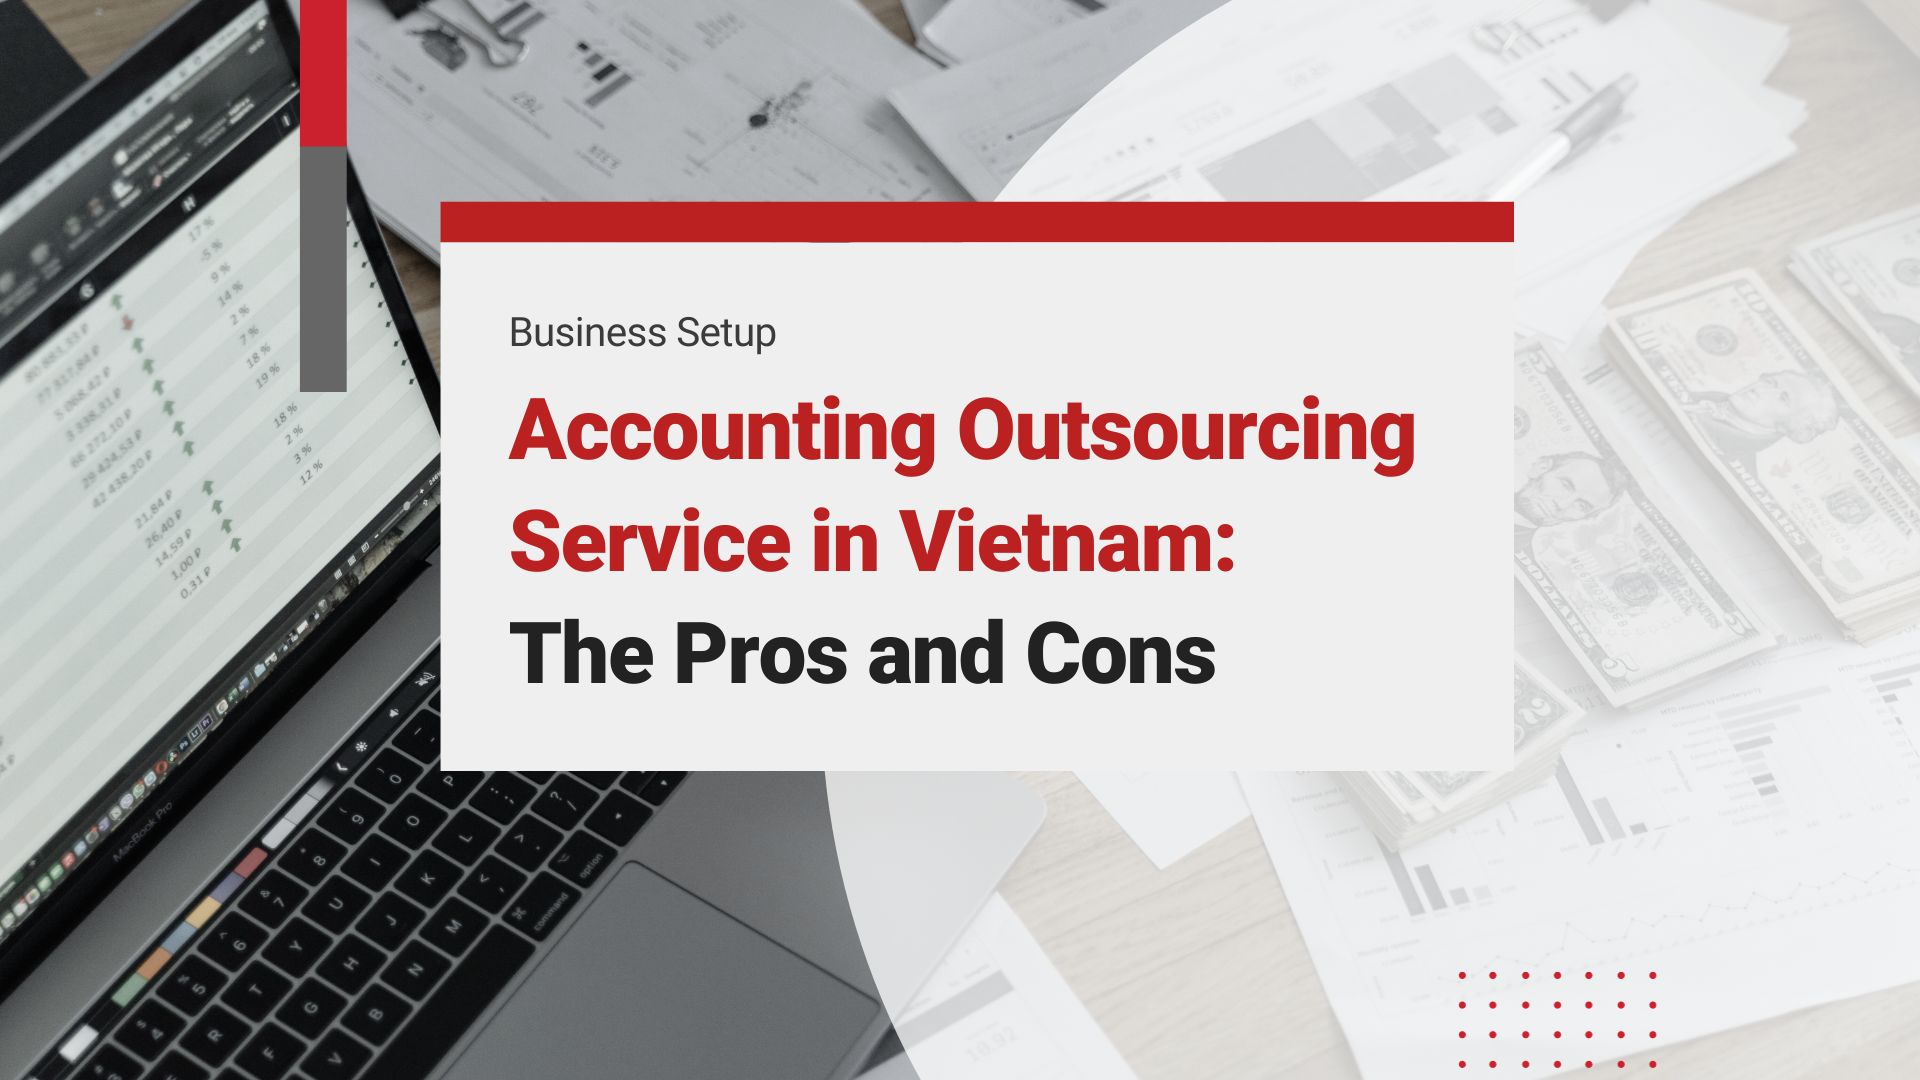 Accounting Outsourcing service in Vietnam